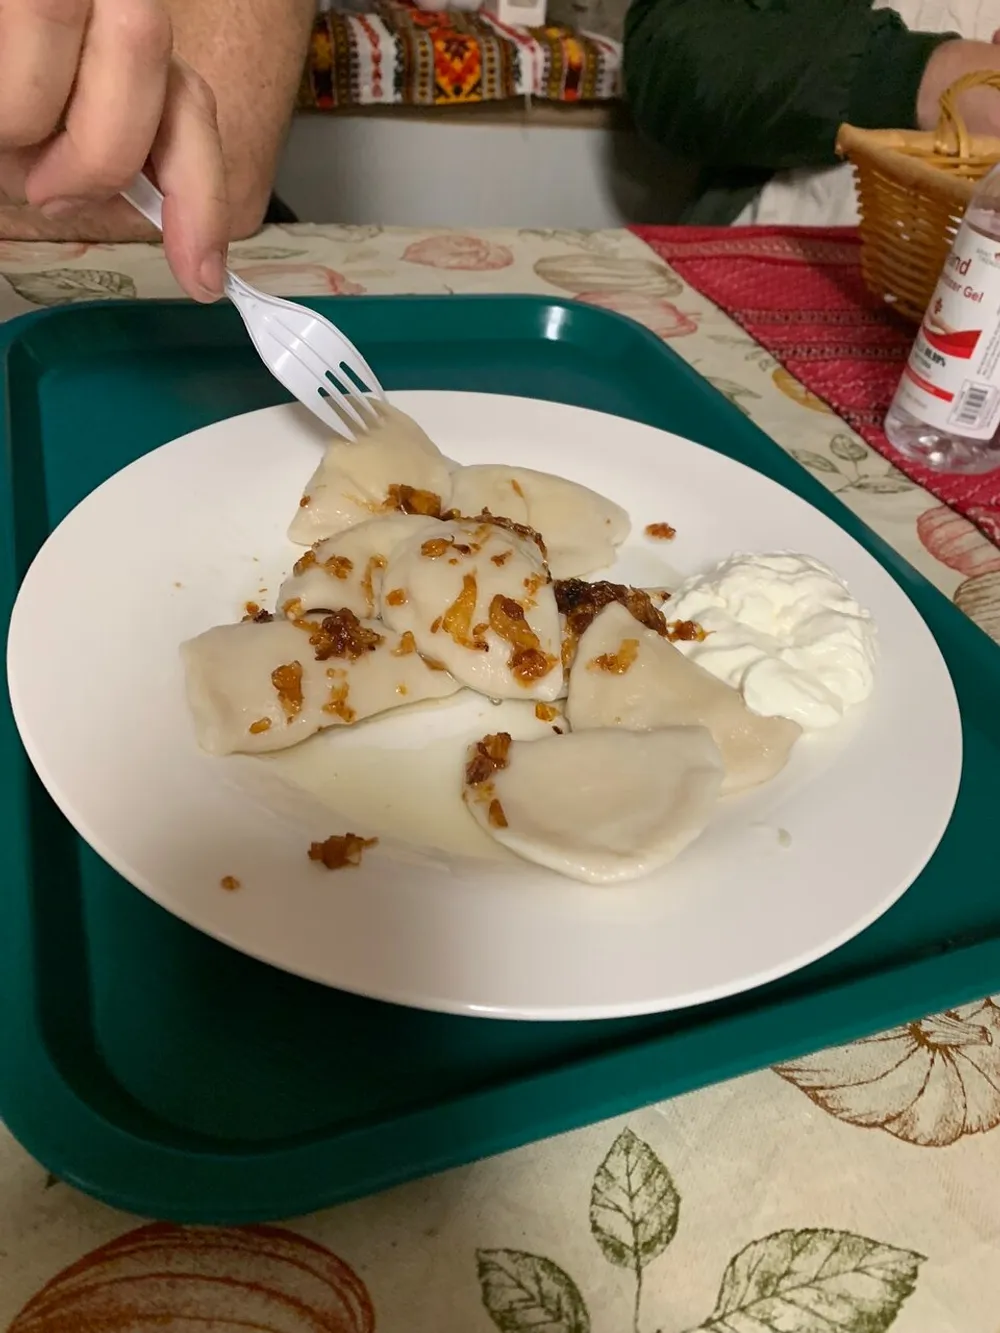 A person is about to eat dumplings topped with fried onions and a side of sour cream on a white plate placed on a green tray